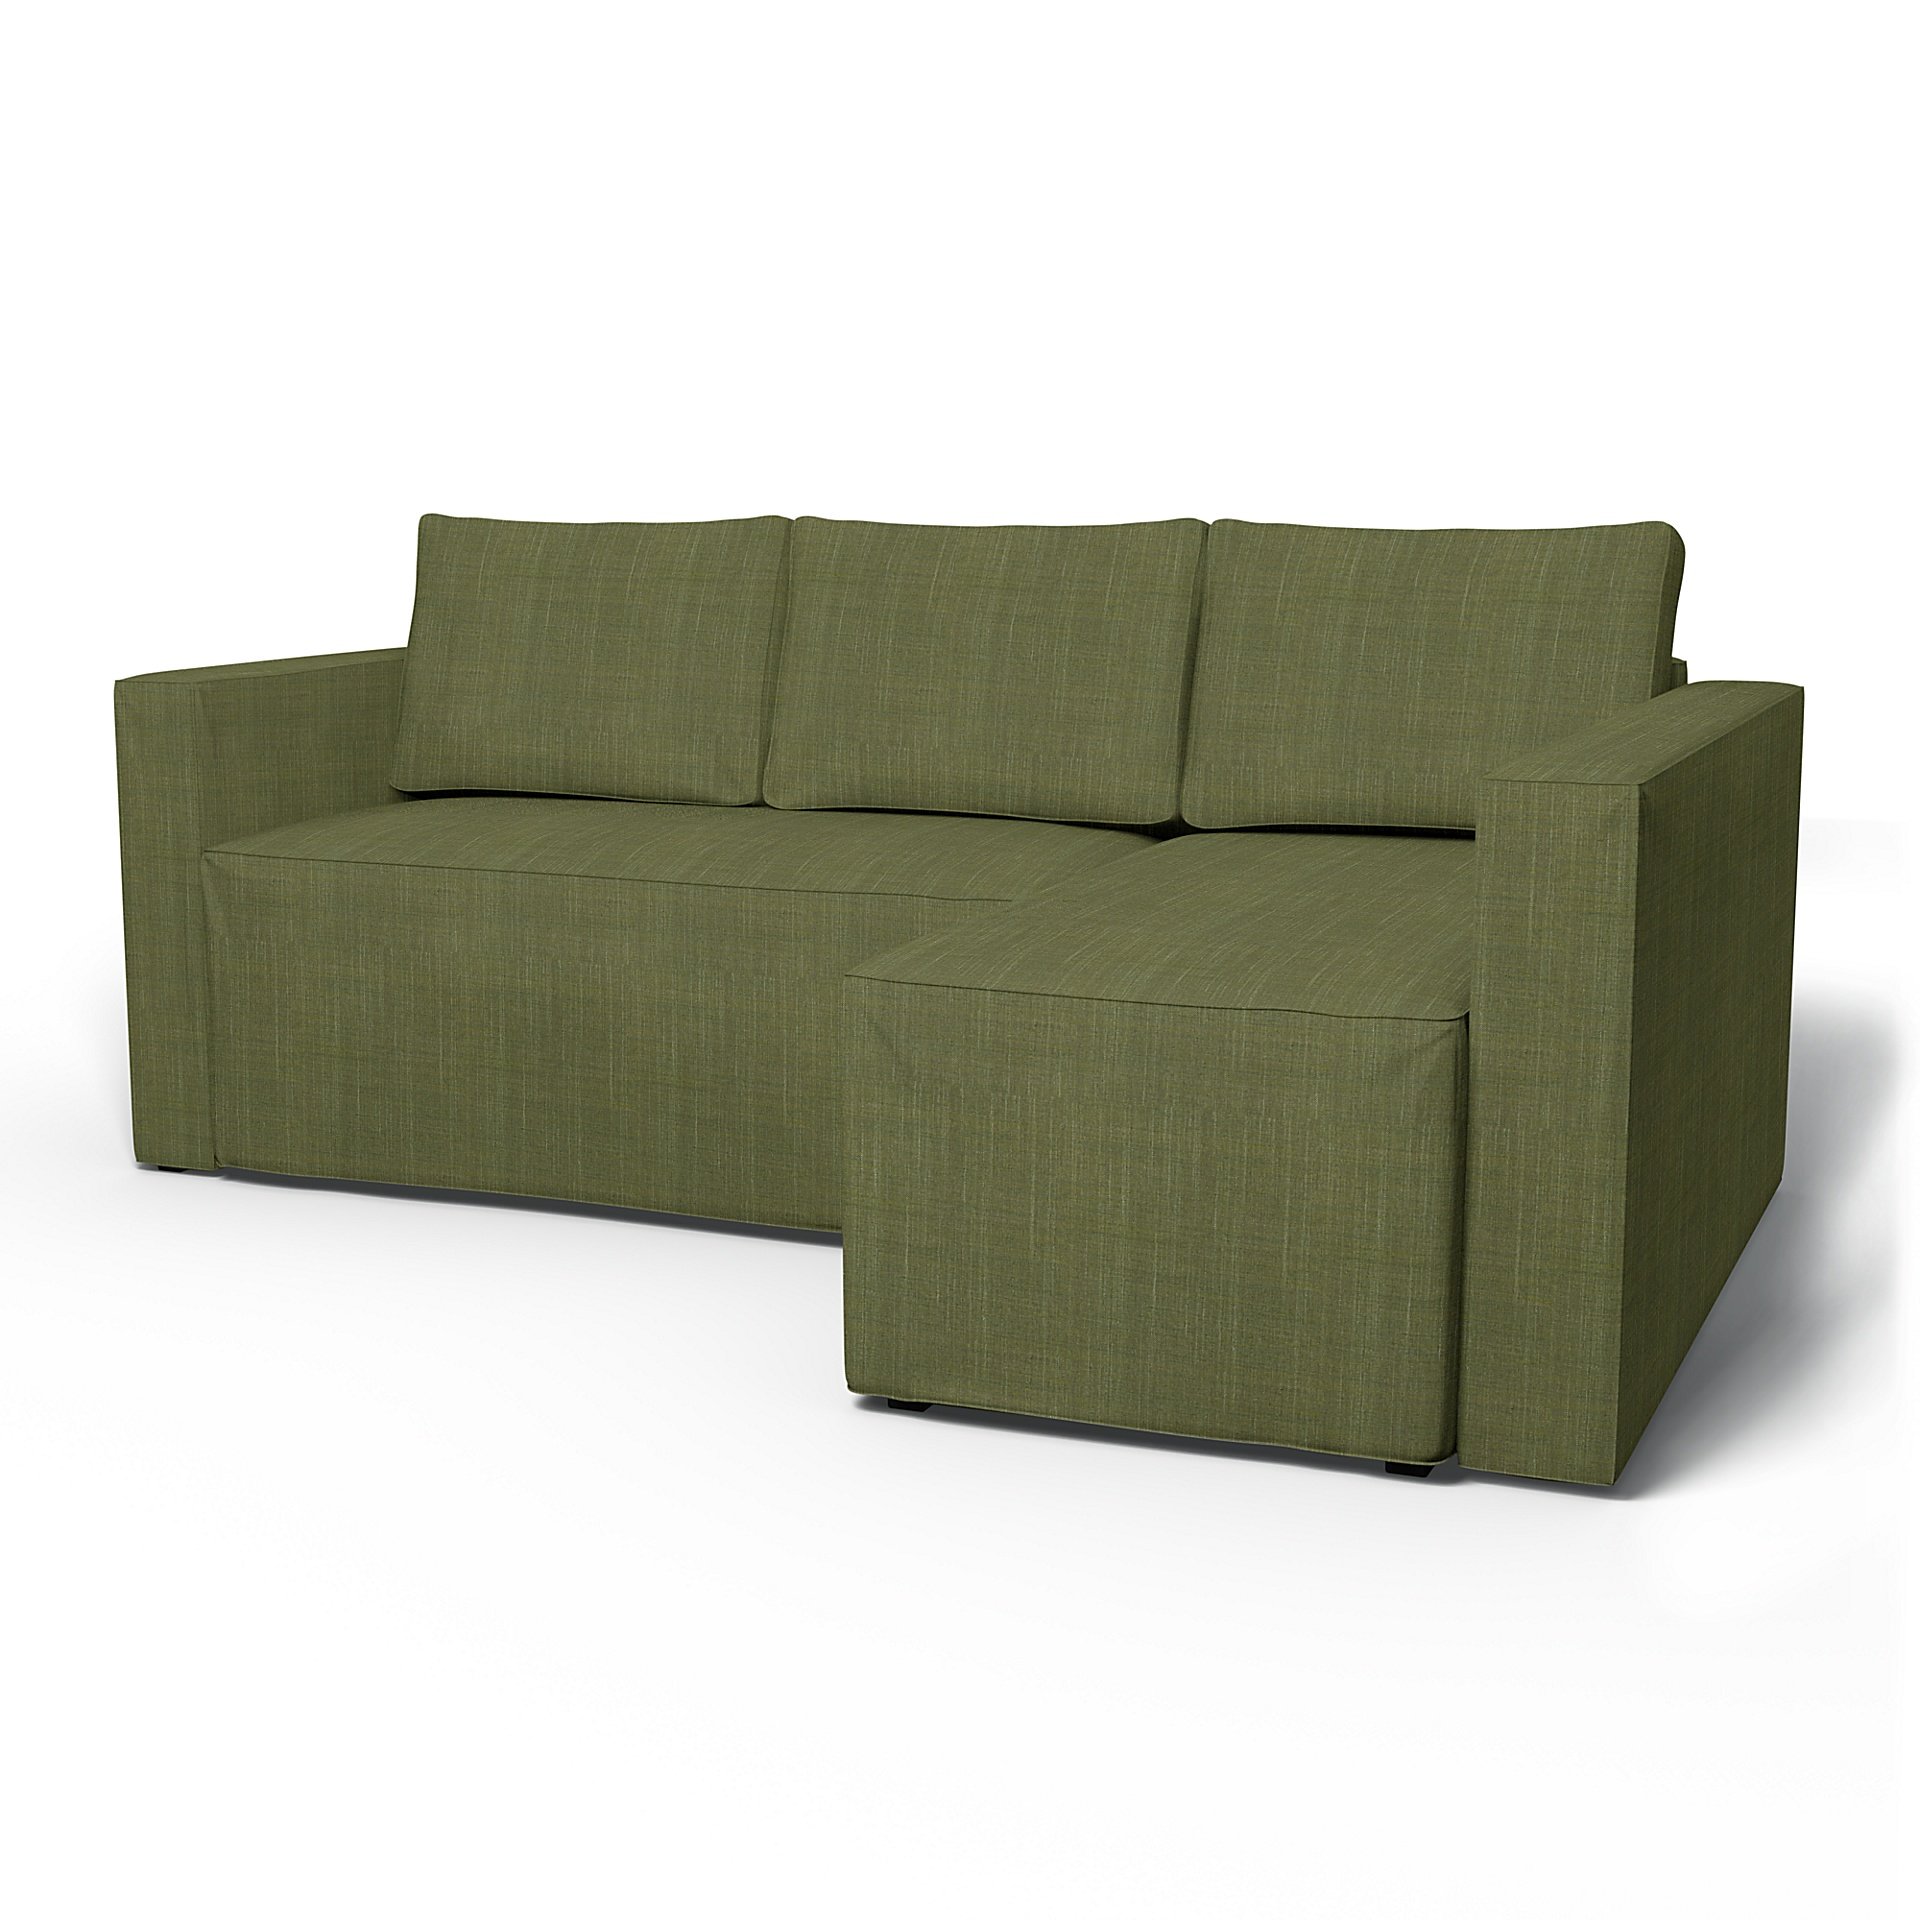 IKEA - Manstad Sofa Bed with Right Chaise Cover, Moss Green, Boucle & Texture - Bemz